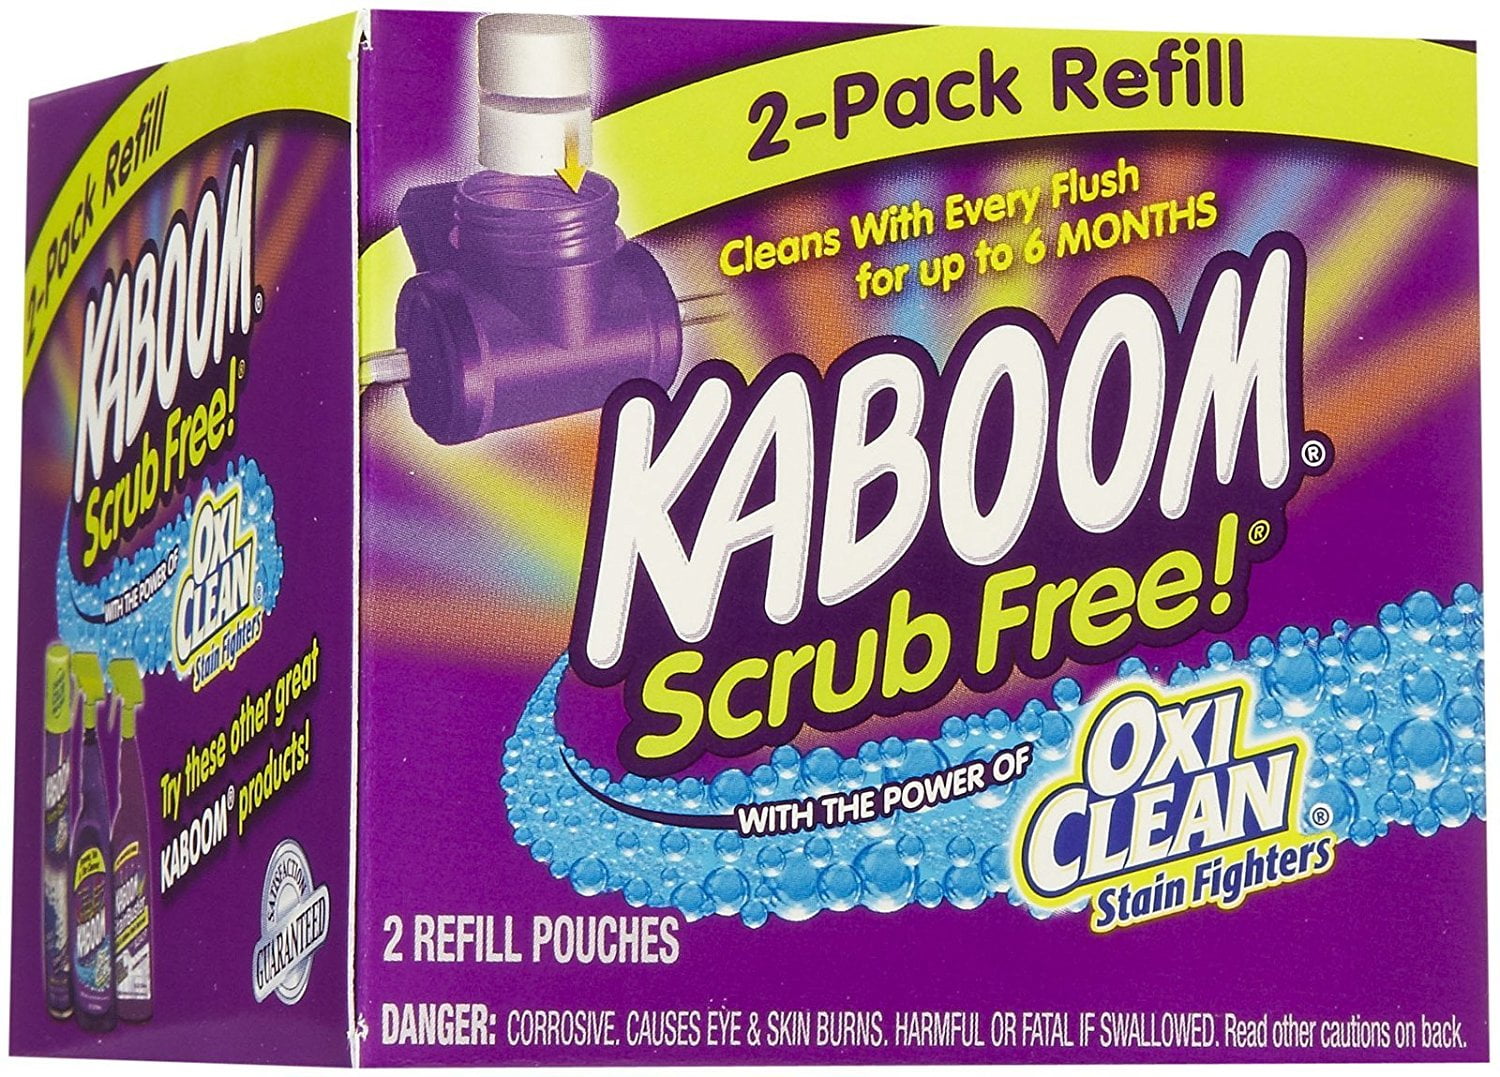 3-Pack Refill Kaboom Scrub Free Continuous Clean with OxiClean 